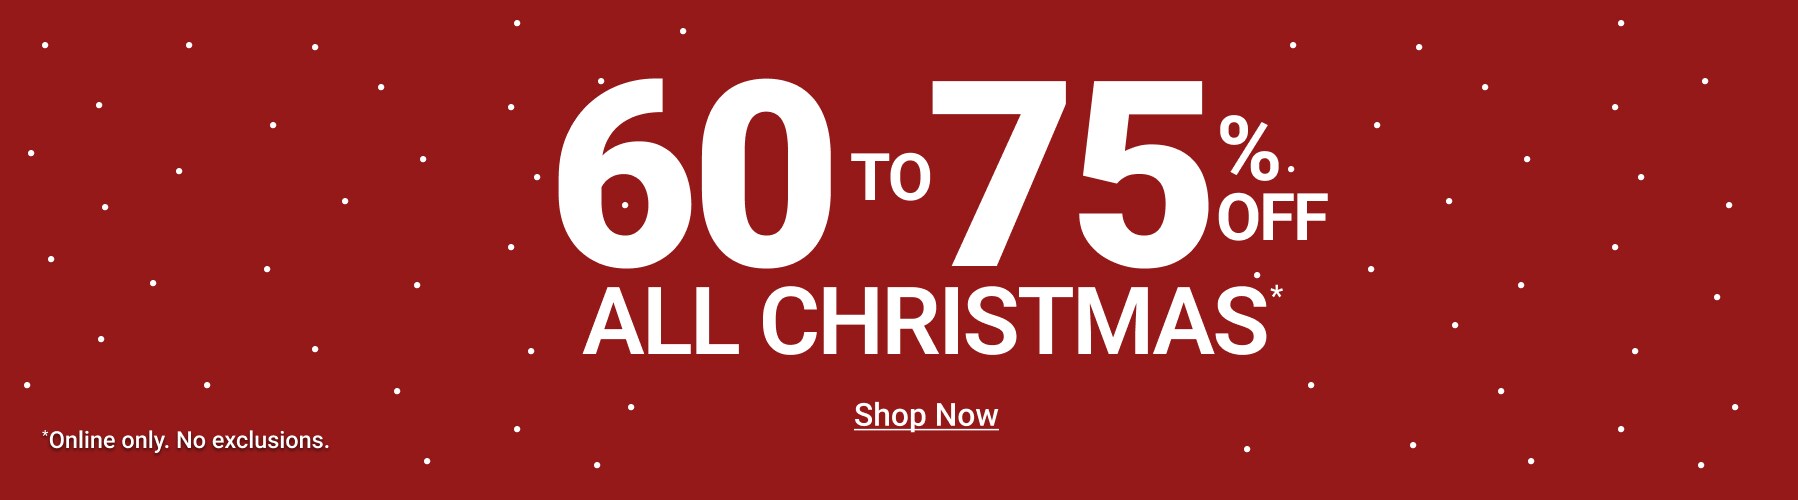 60-75% Off All Christmas - Shop Now